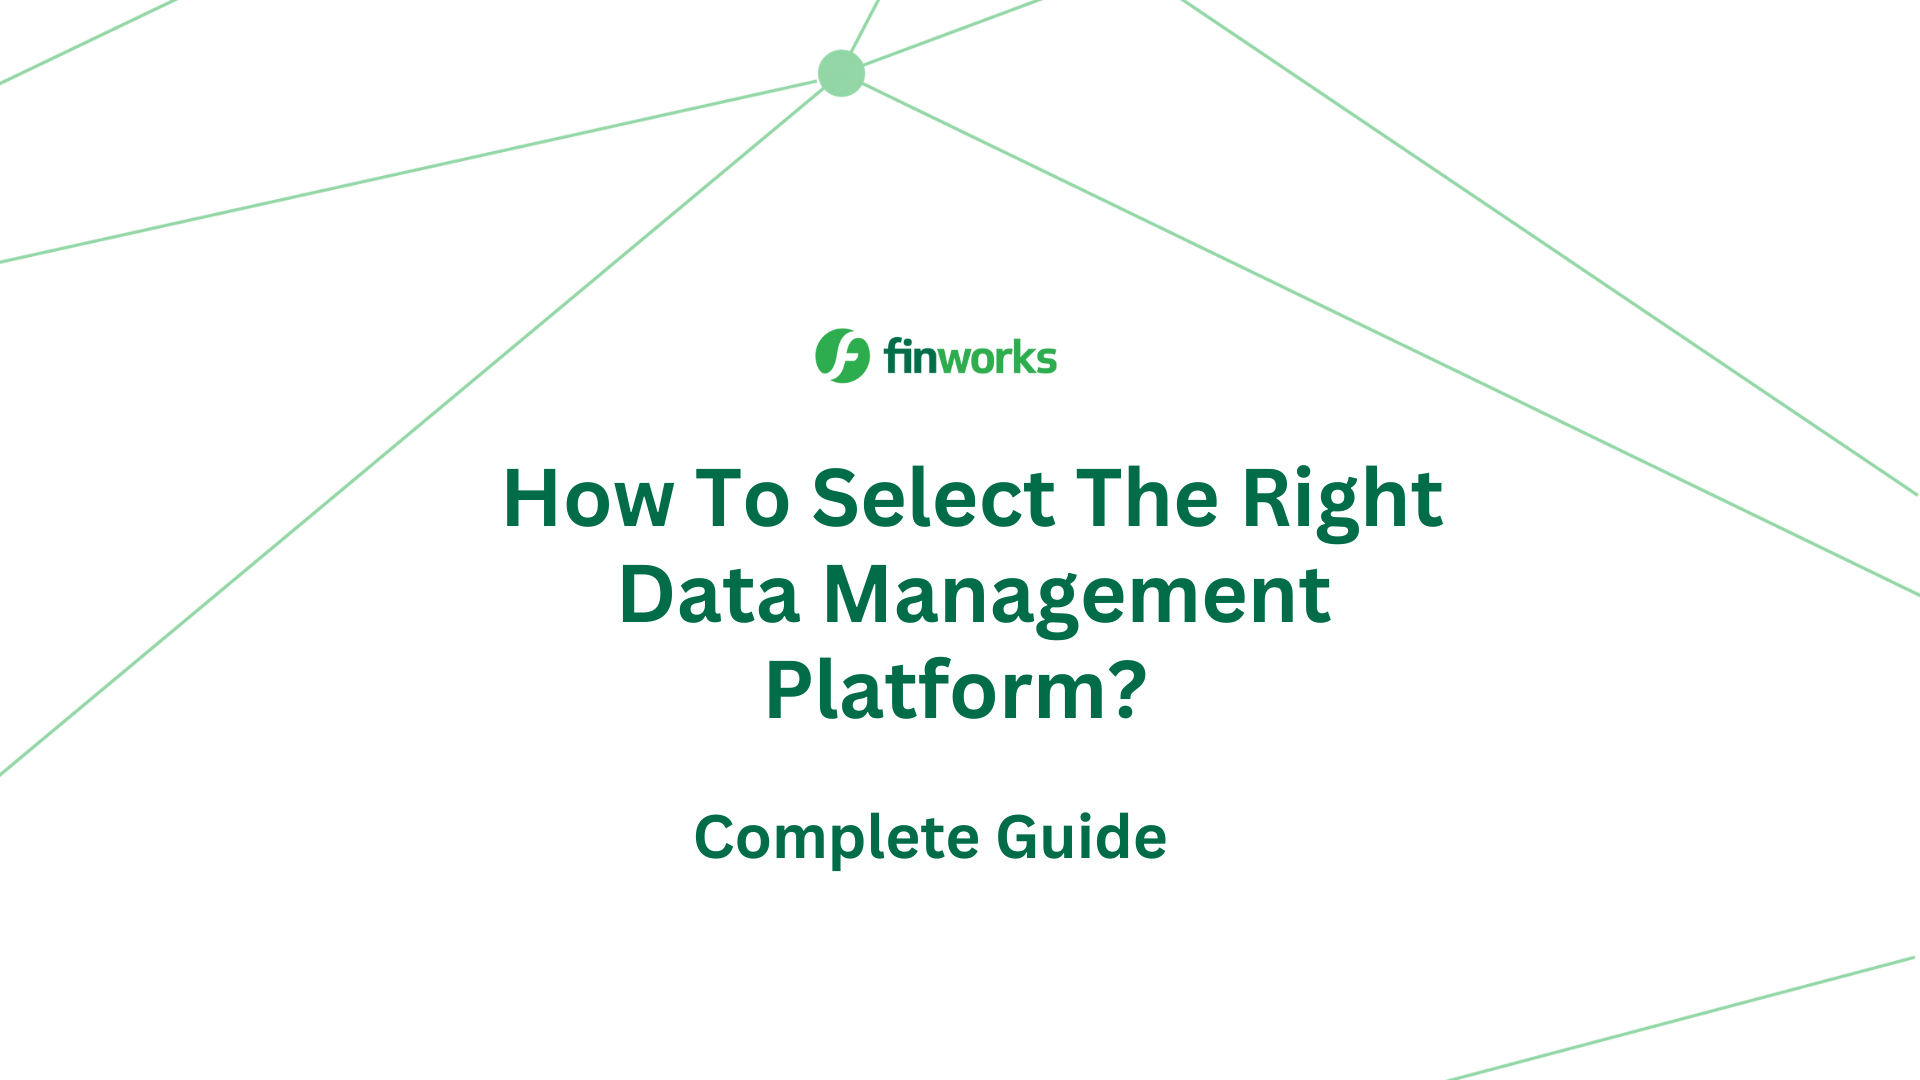 Complete Guide: How To Select The Right Data Management Platform?  